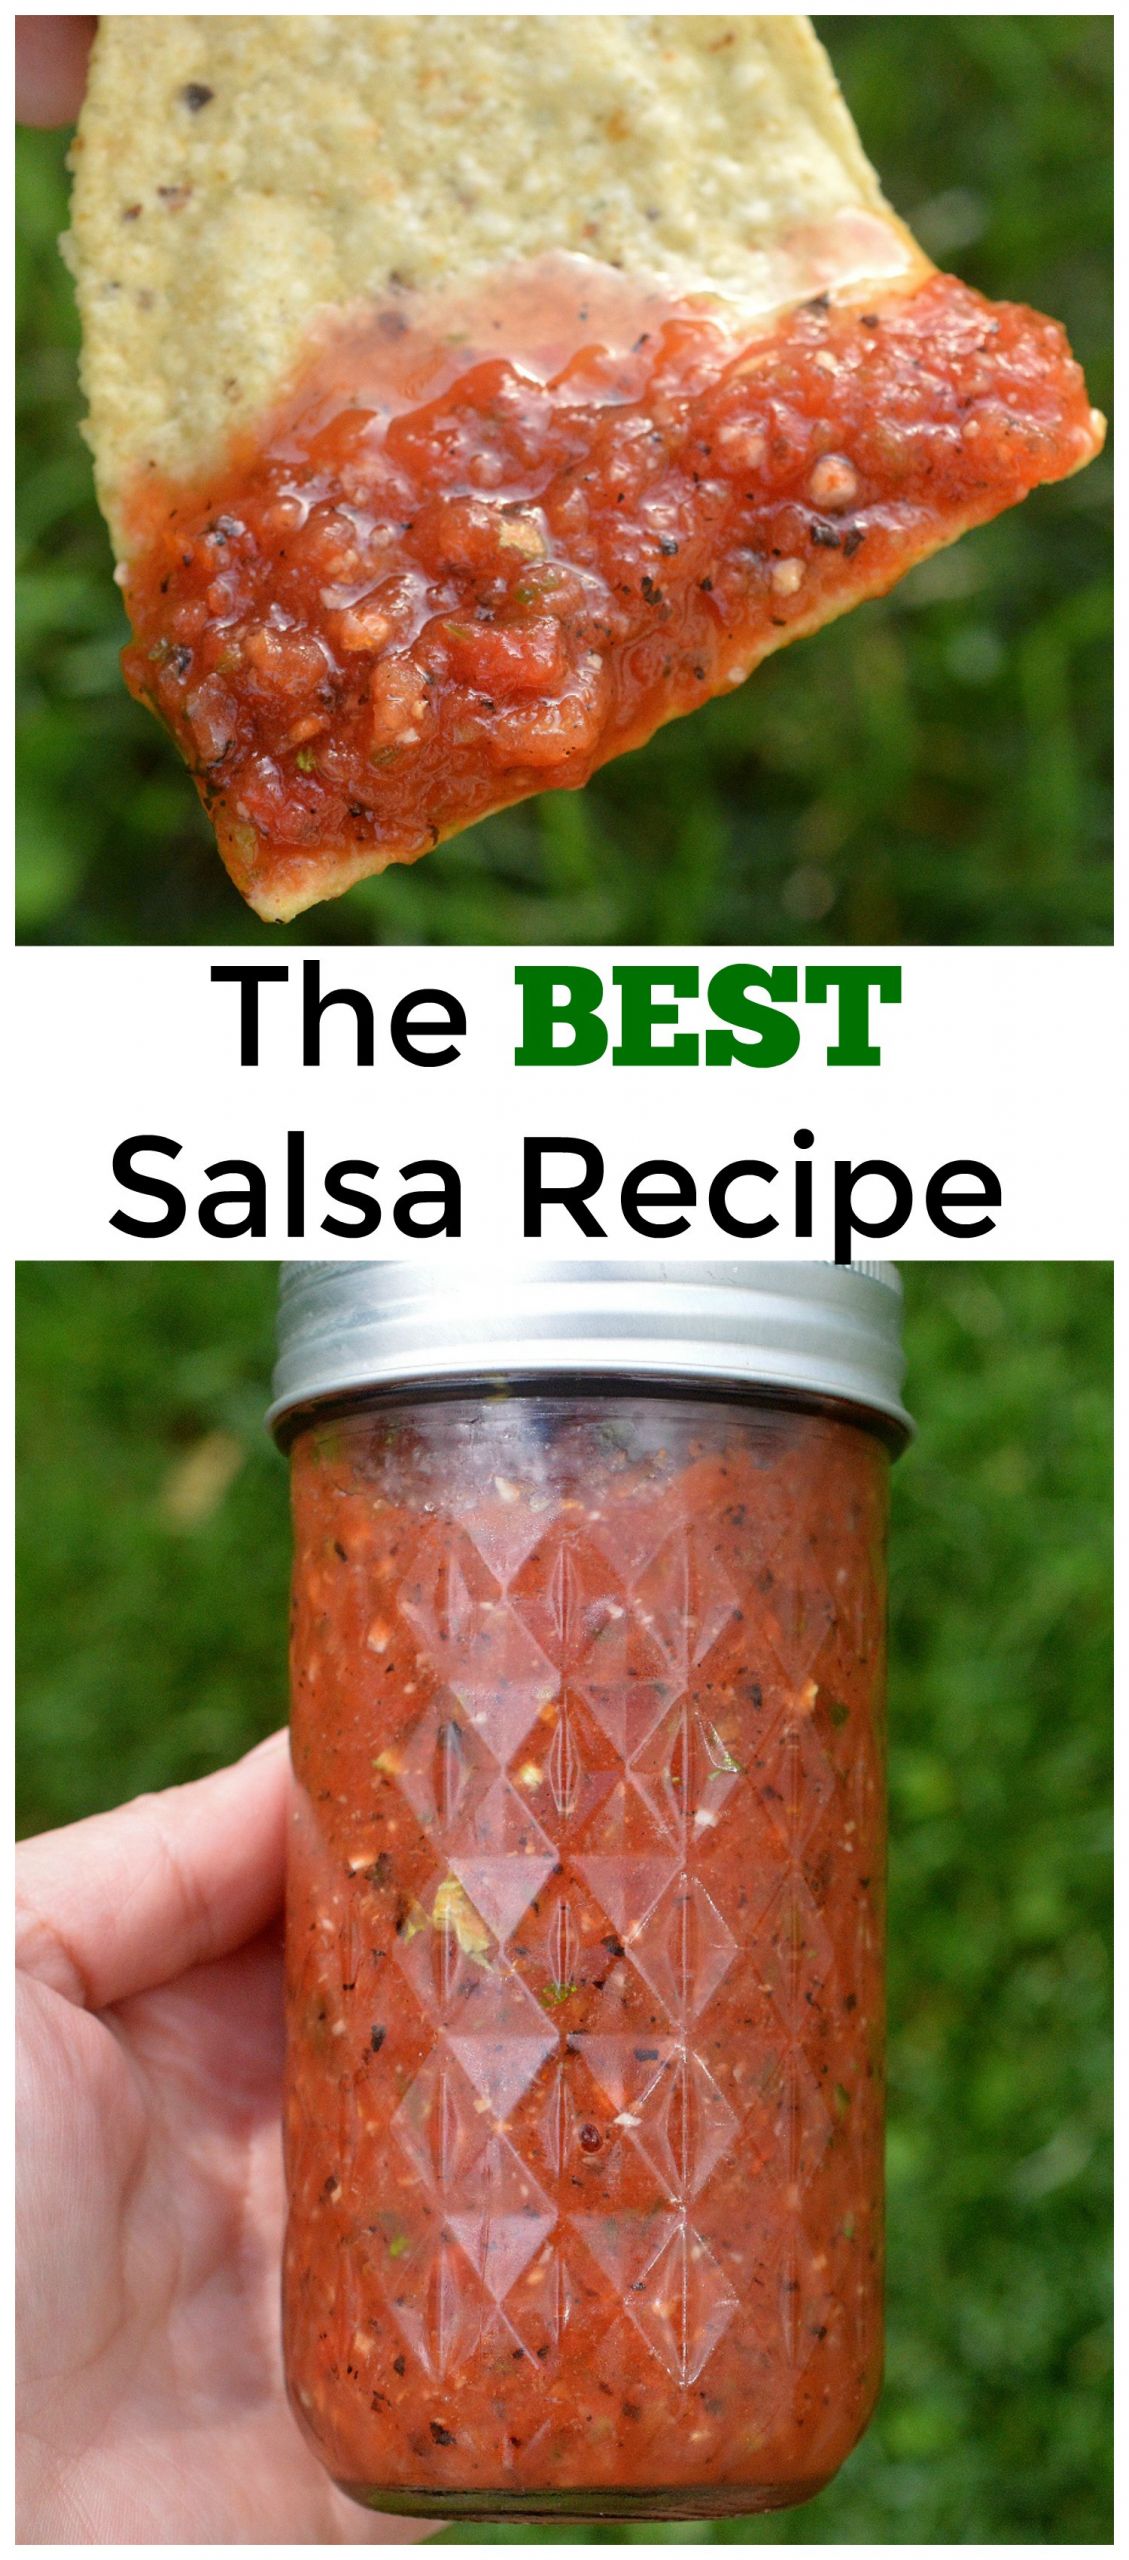 Best Homemade Salsa Recipe Ever
 The BEST and Easiest Salsa Recipe